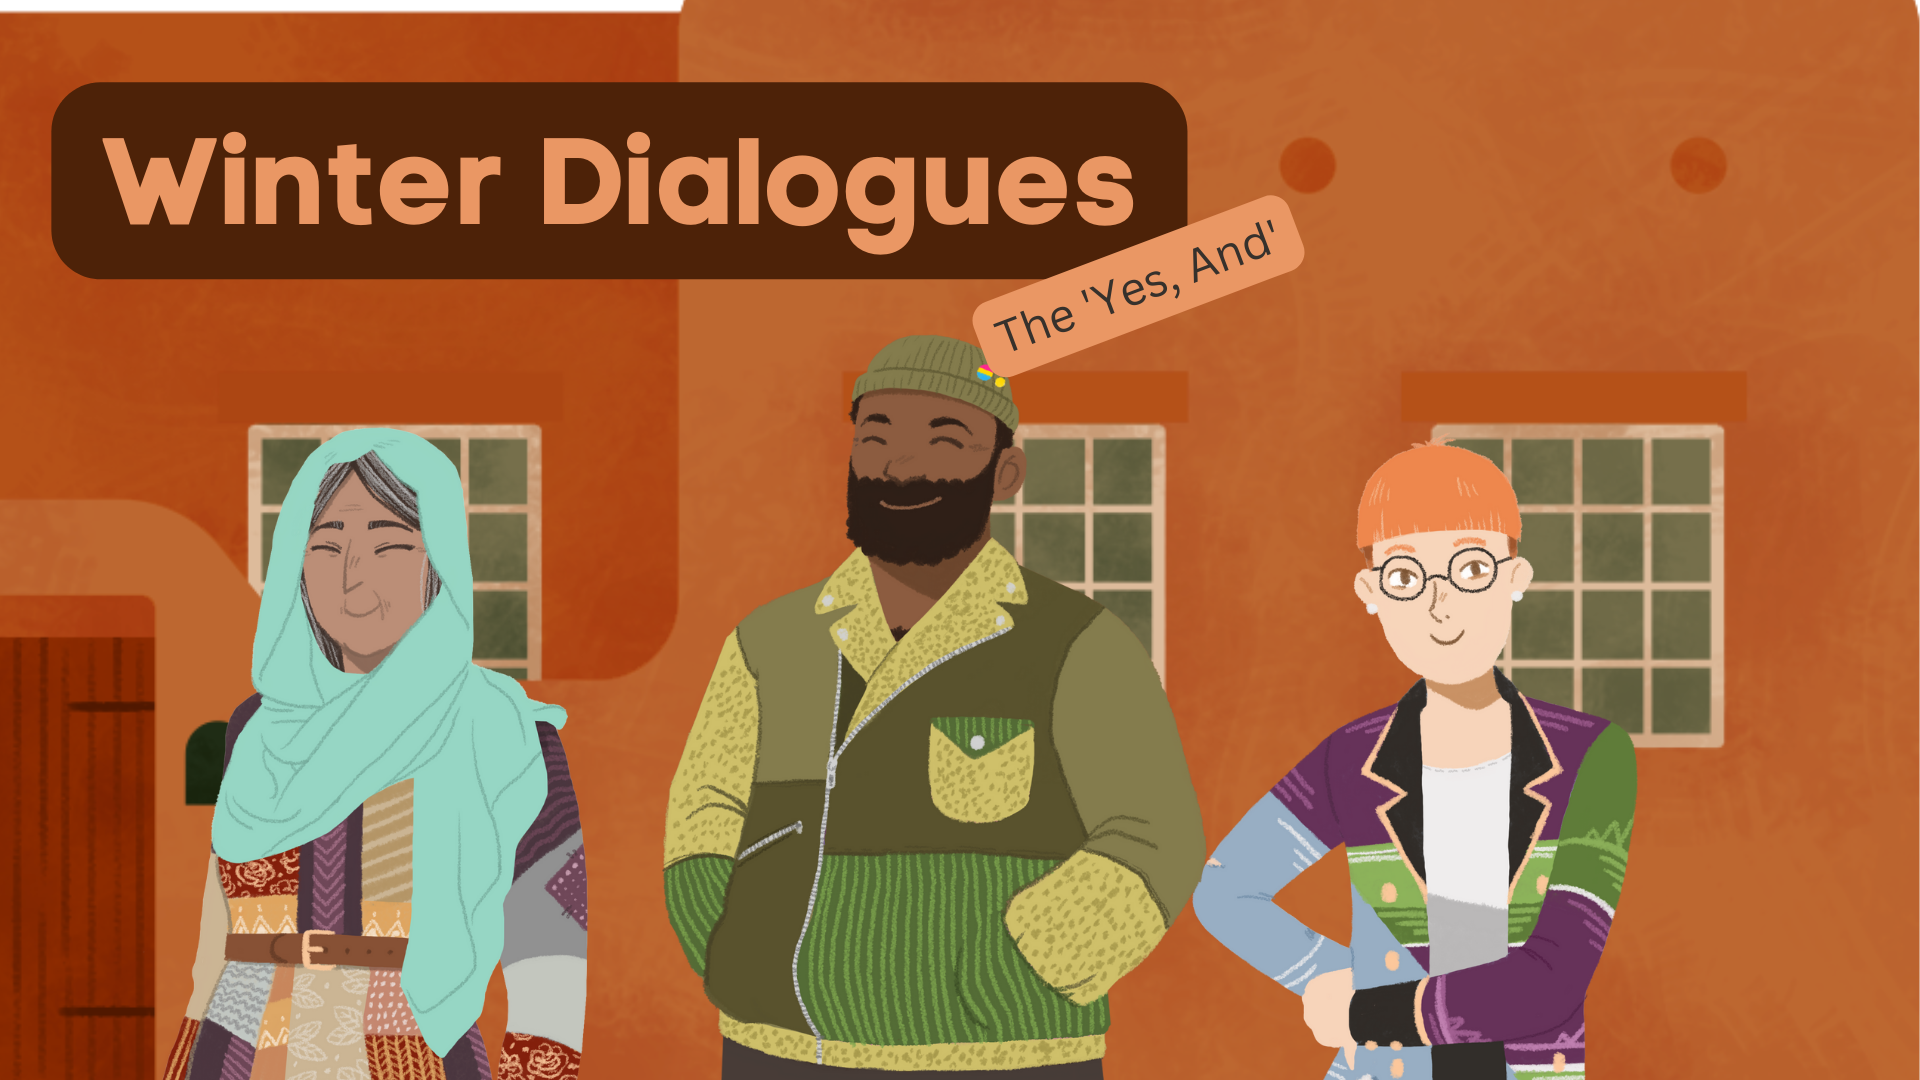 Winter Dialogues (The 'Yes, And')